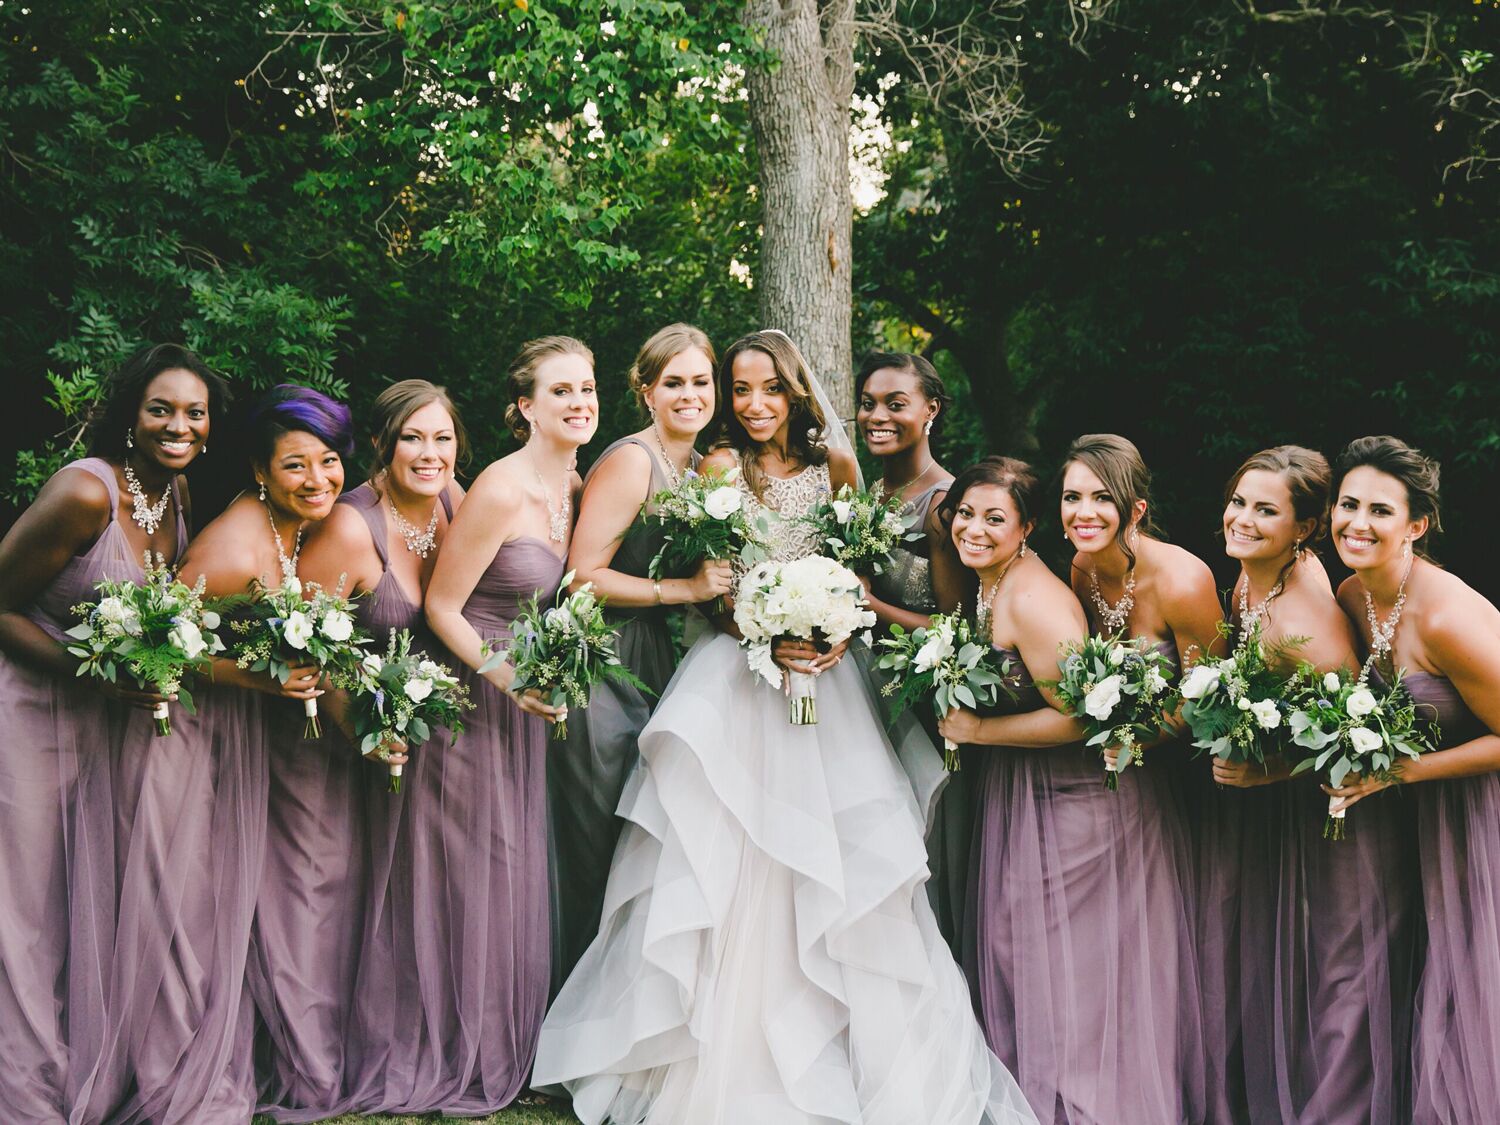 stores that sell bridesmaid dresses